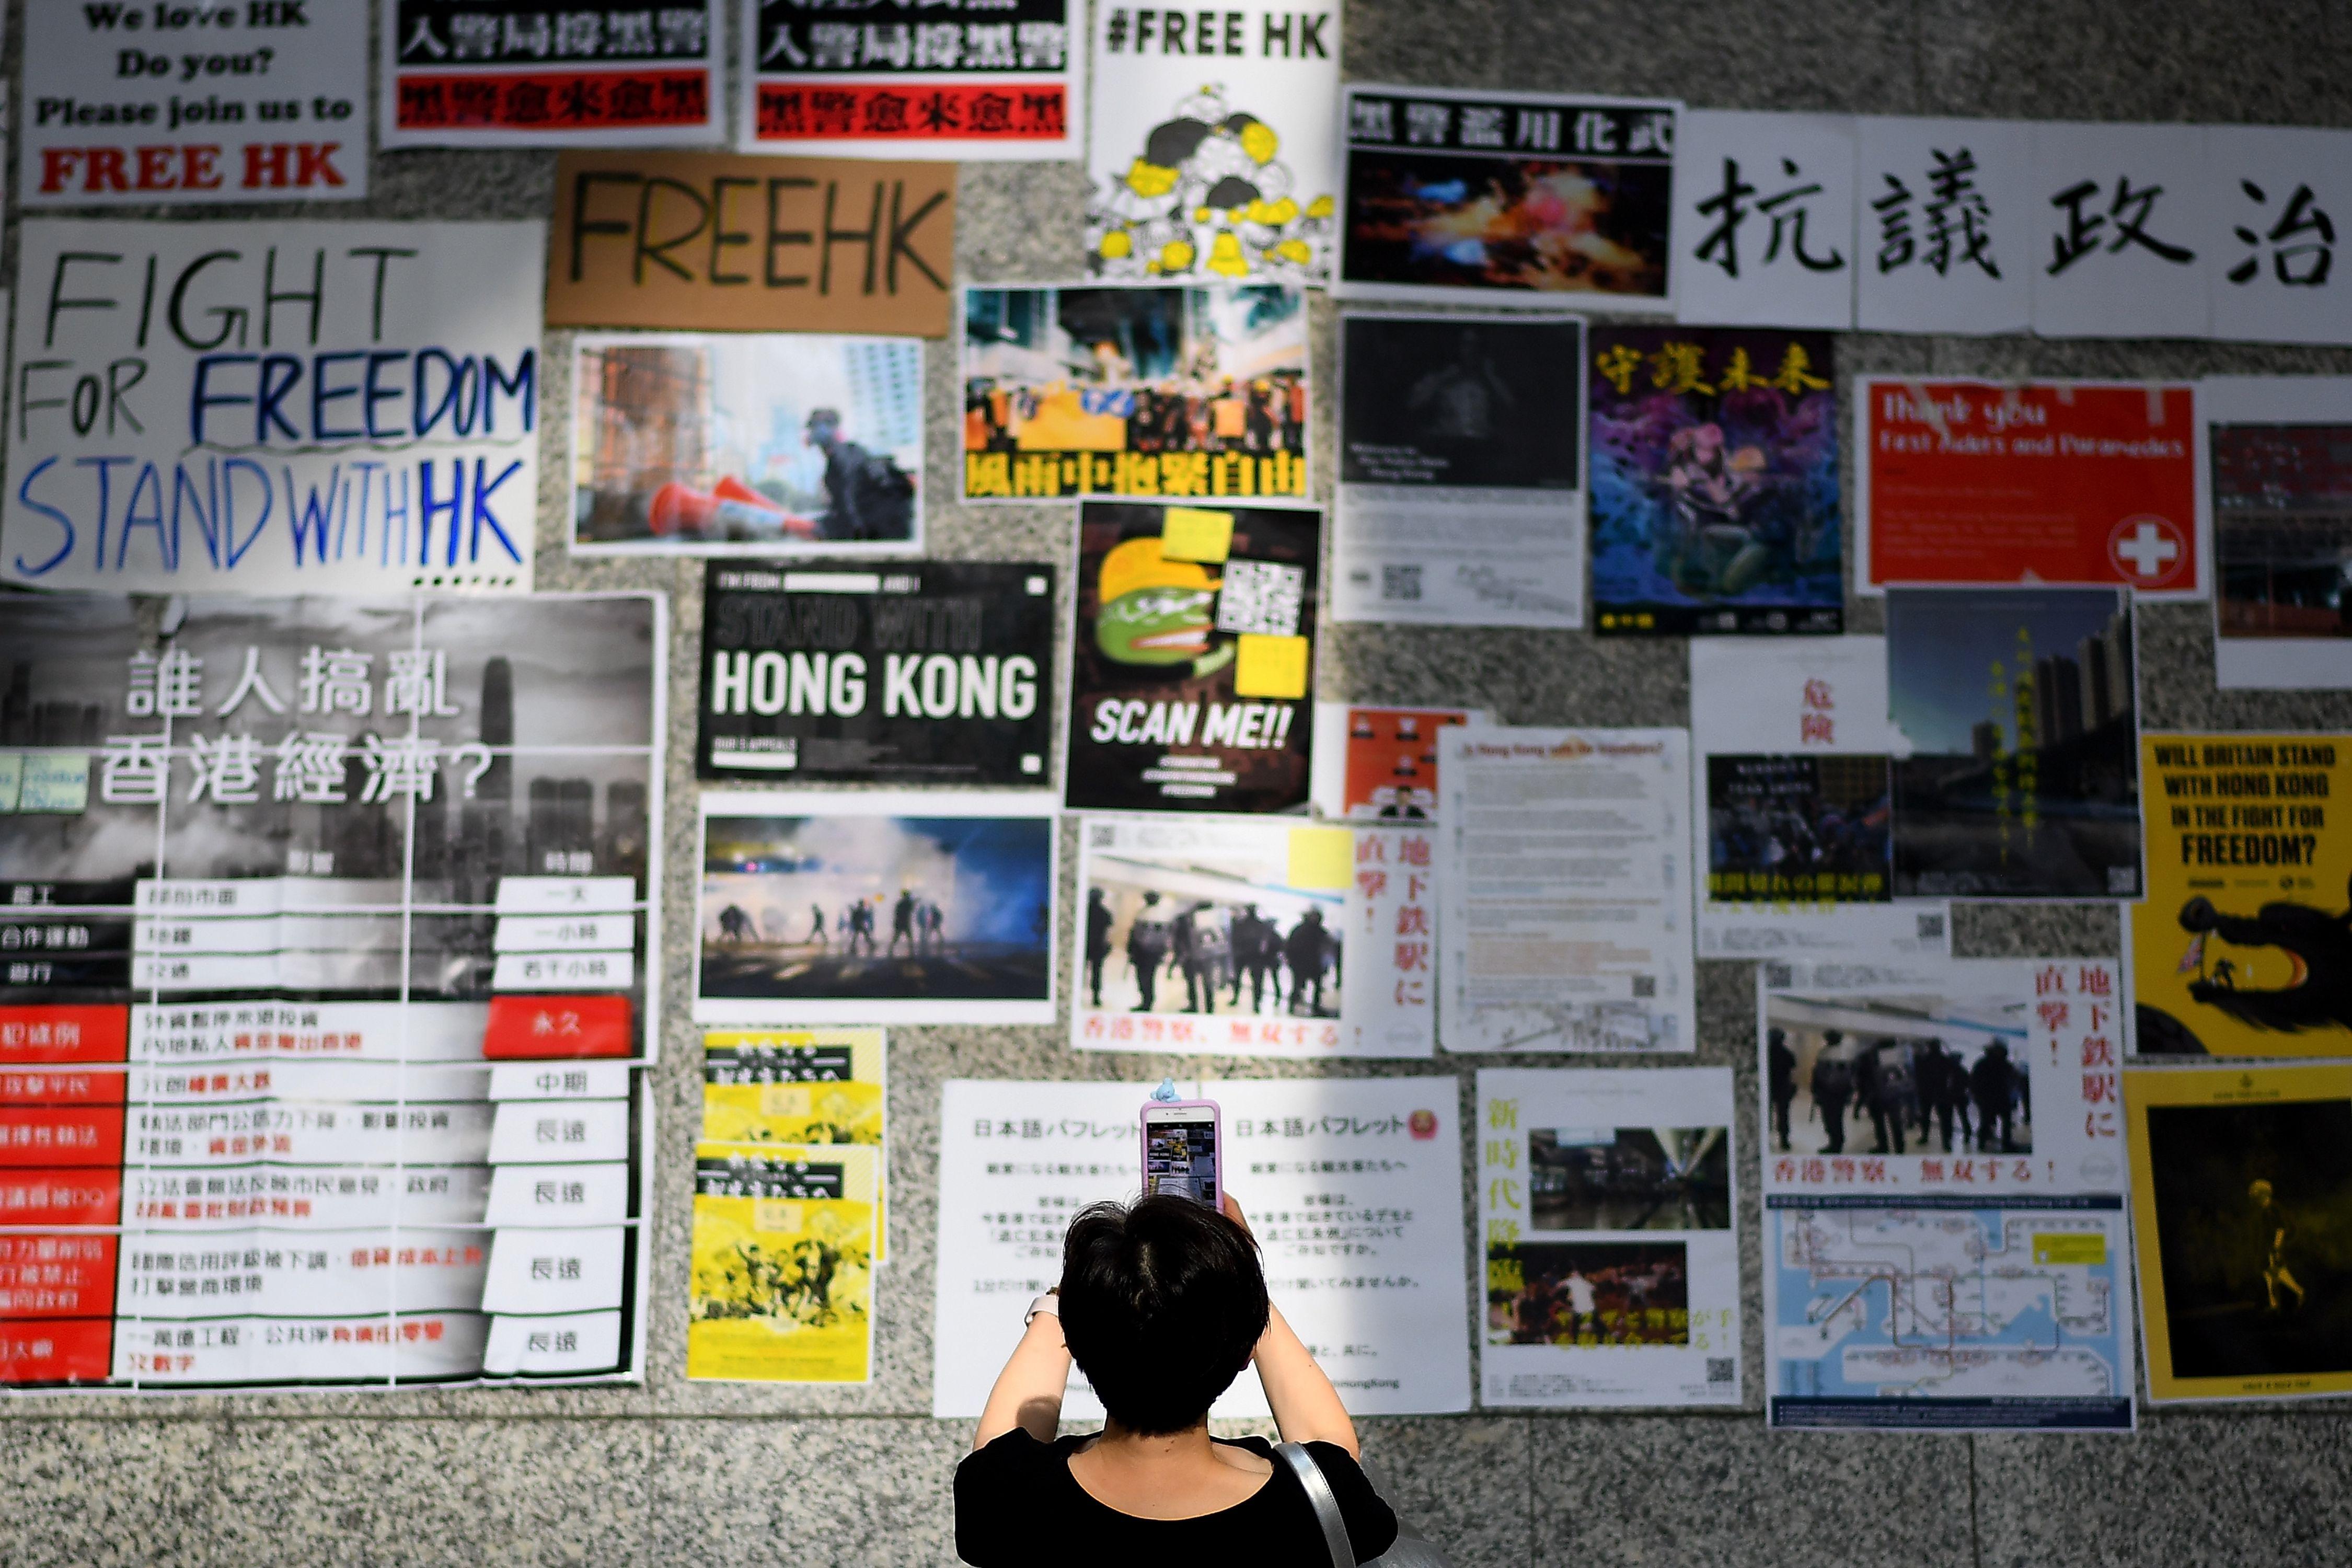 A woman takes photographs of messages by Pro-Democracy protesters at the airport.